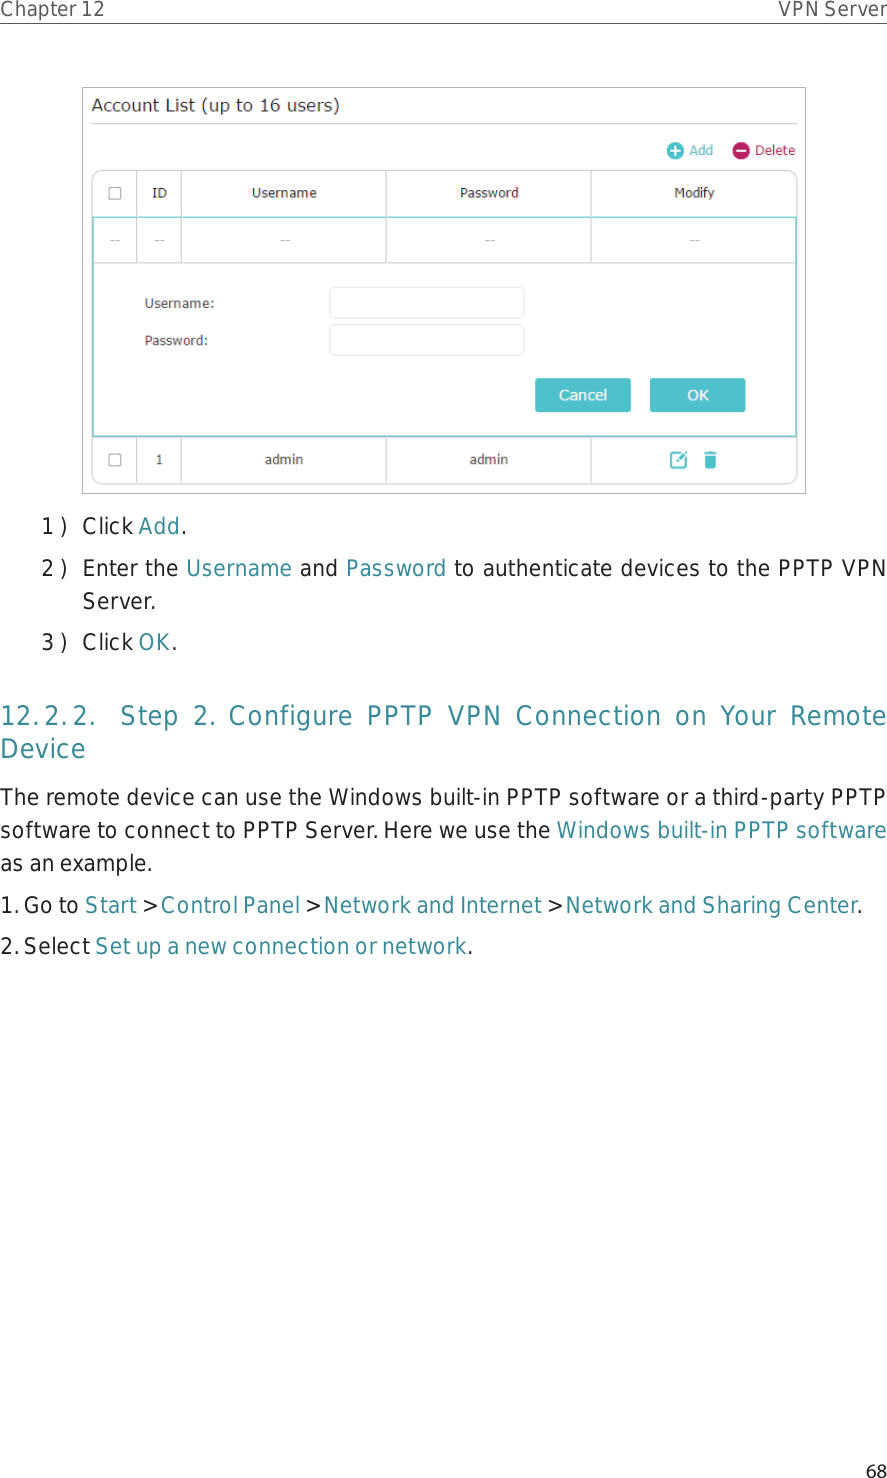 68Chapter 12 VPN Server1 )  Click Add.2 )  Enter the Username and Password to authenticate devices to the PPTP VPN Server.3 )  Click OK.12. 2. 2.  Step 2. Configure PPTP VPN Connection on Your Remote DeviceThe remote device can use the Windows built-in PPTP software or a third-party PPTP software to connect to PPTP Server. Here we use the Windows built-in PPTP software as an example.1. Go to Start &gt; Control Panel &gt; Network and Internet &gt; Network and Sharing Center.2. Select Set up a new connection or network.